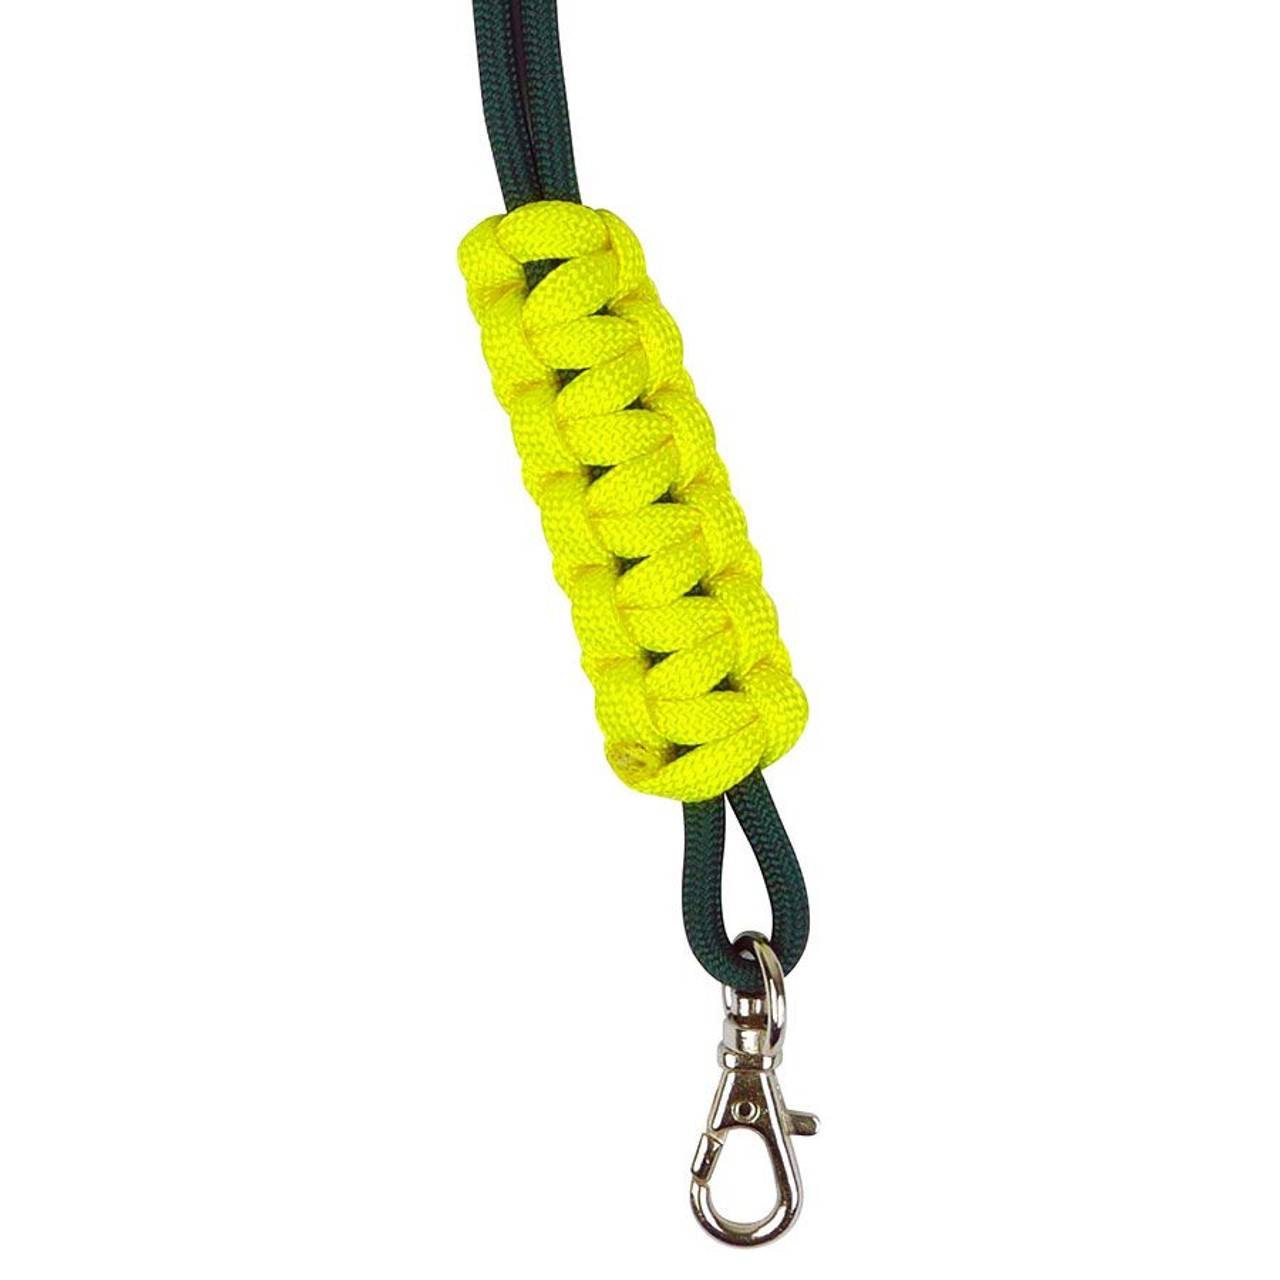 https://cdn11.bigcommerce.com/s-tumf4kk1l4/images/stencil/1280x1280/products/3298/6039/cert-paracord-lanyard-with-swivel-snap-hook-clasp-21__82939.1640715327.jpg?c=1?imbypass=on